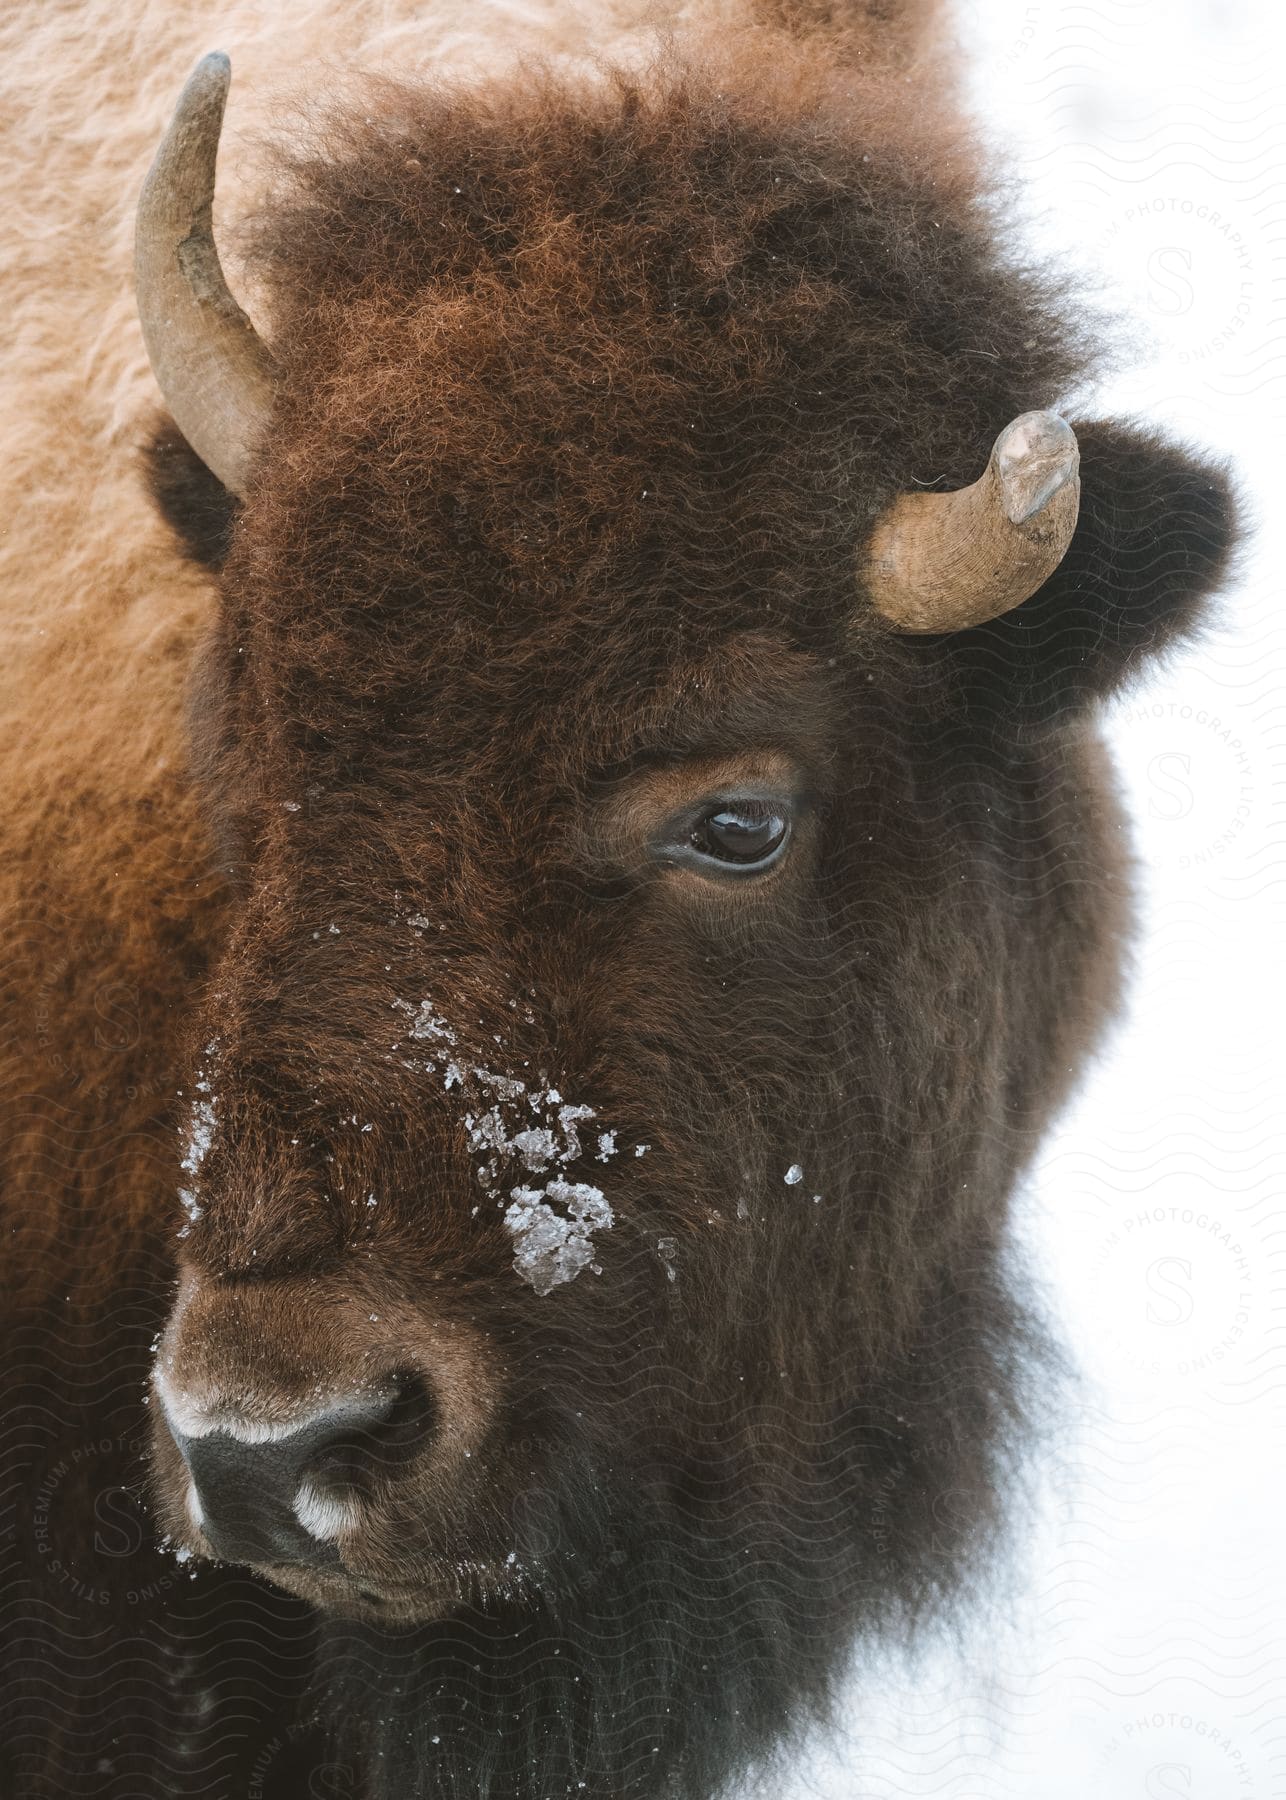 A bison outdoors in a snowy area